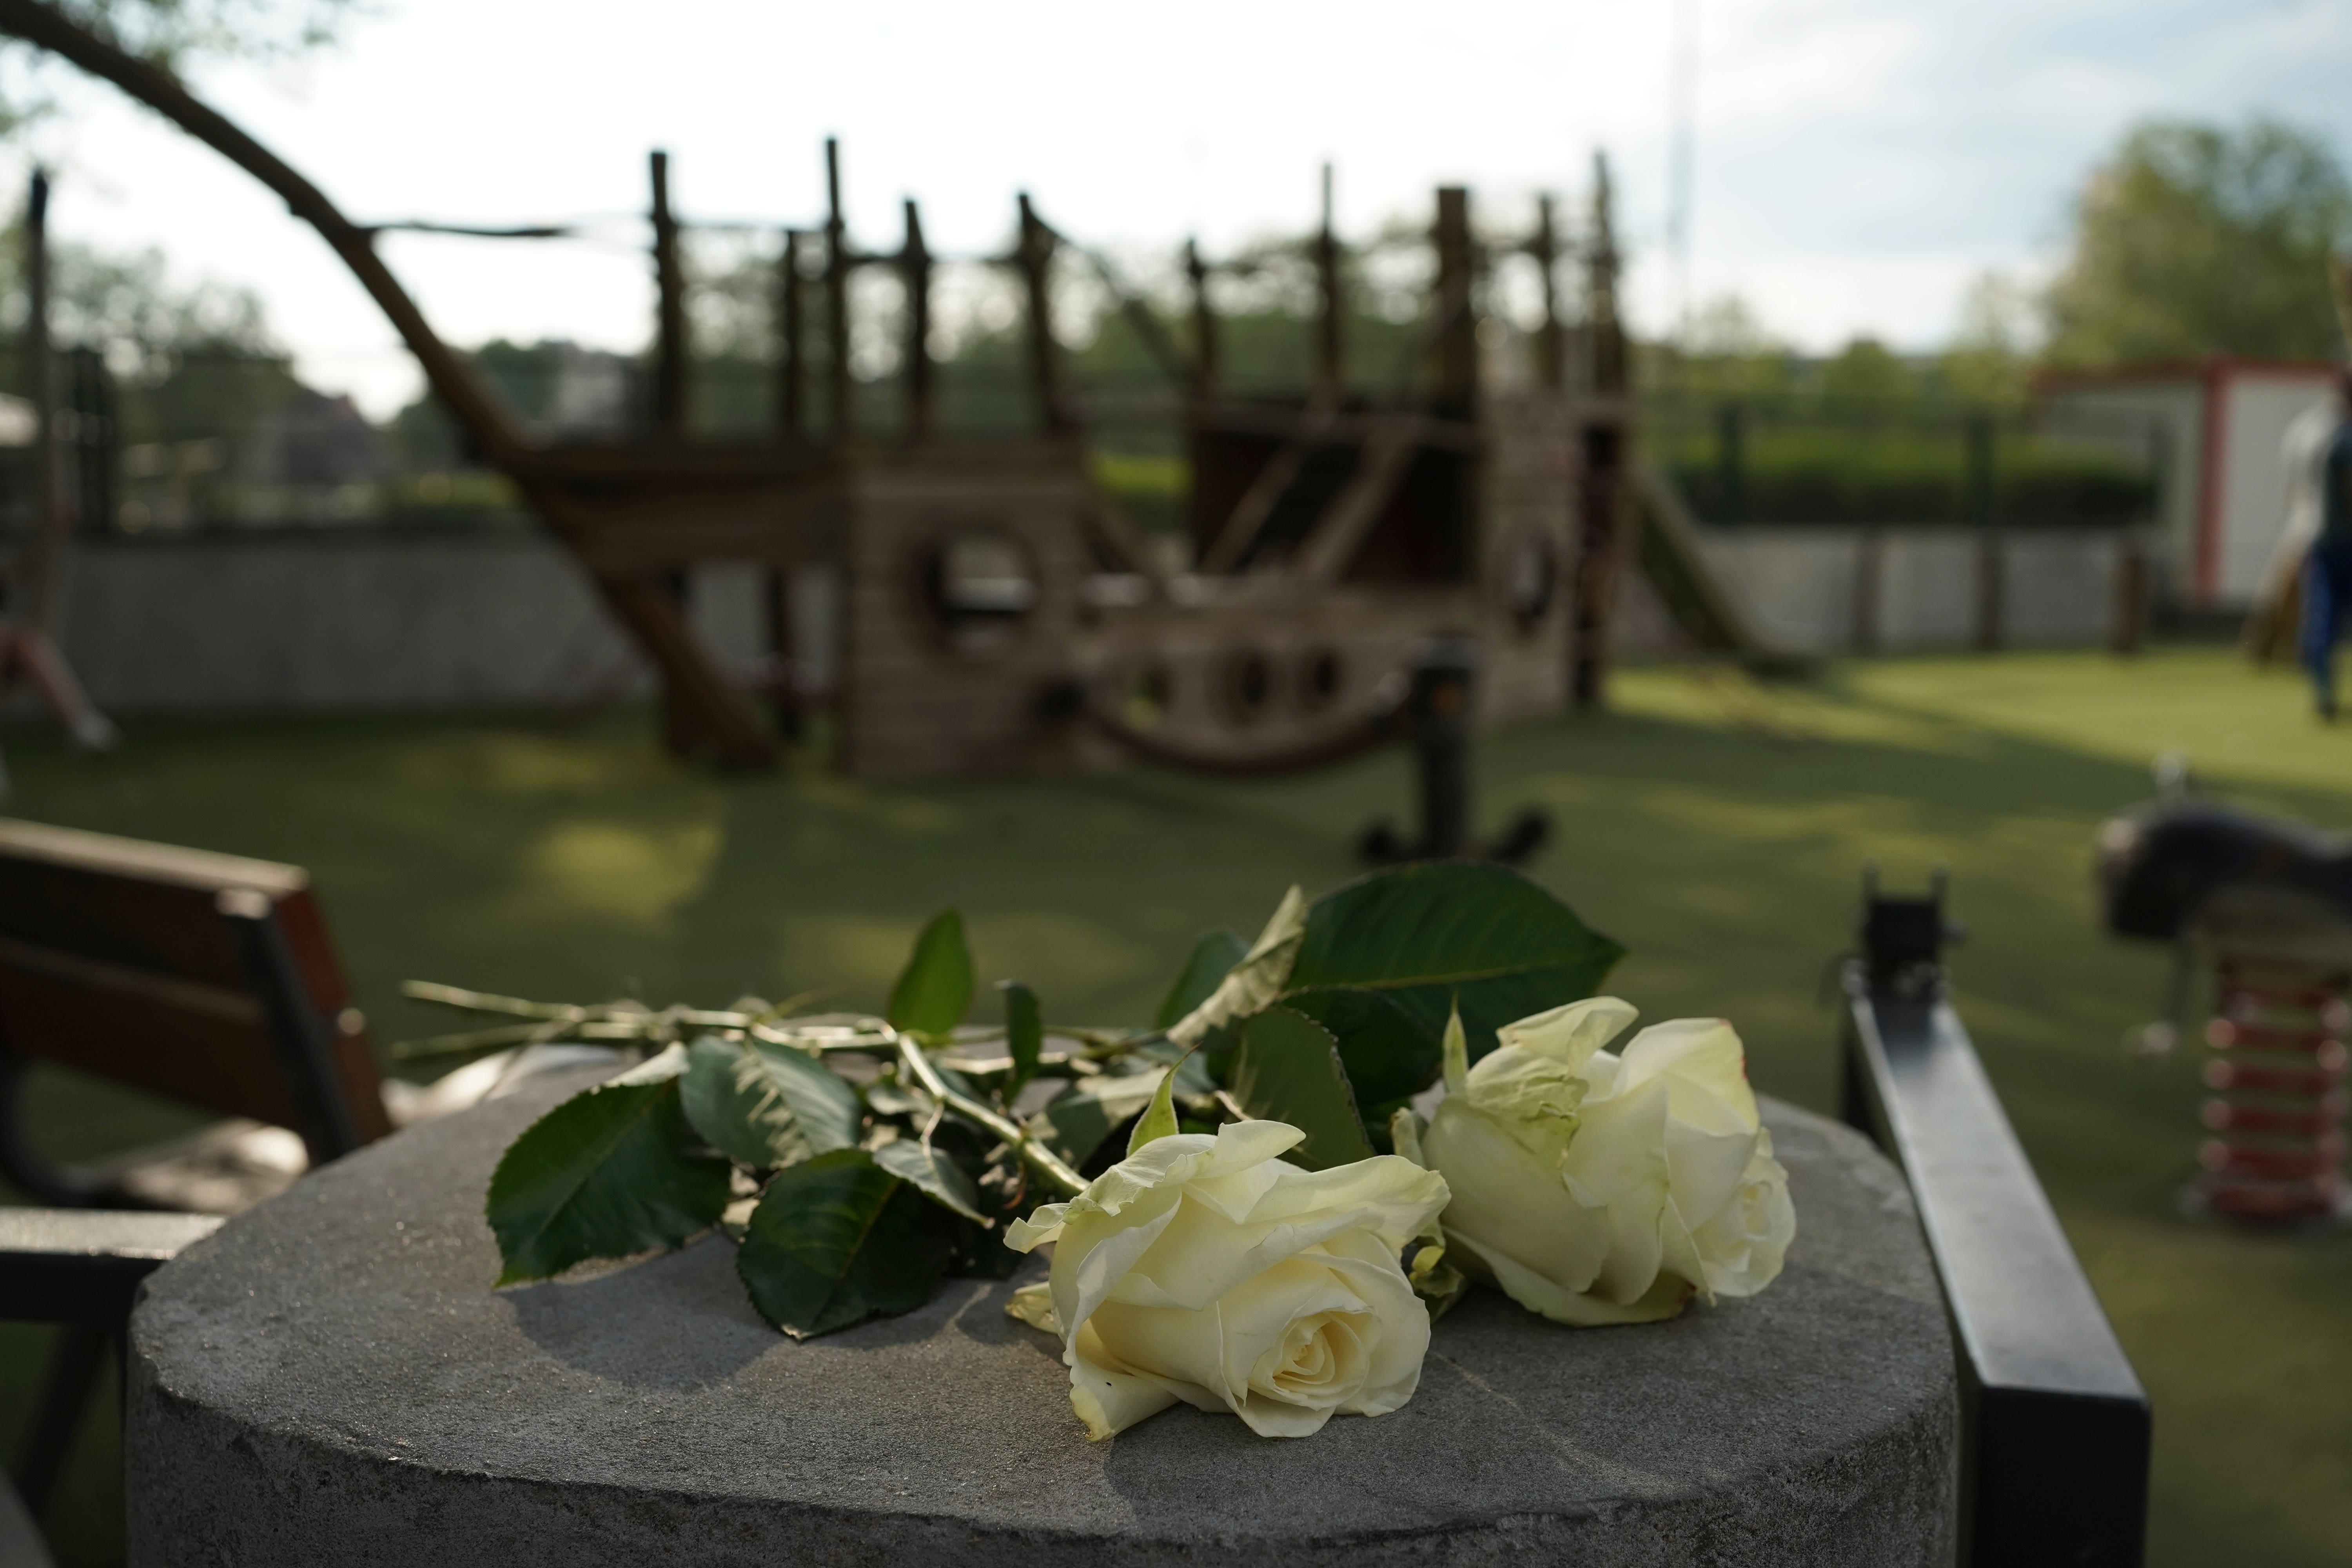 Floral tributes were left at the playground where the stabbing unfolded